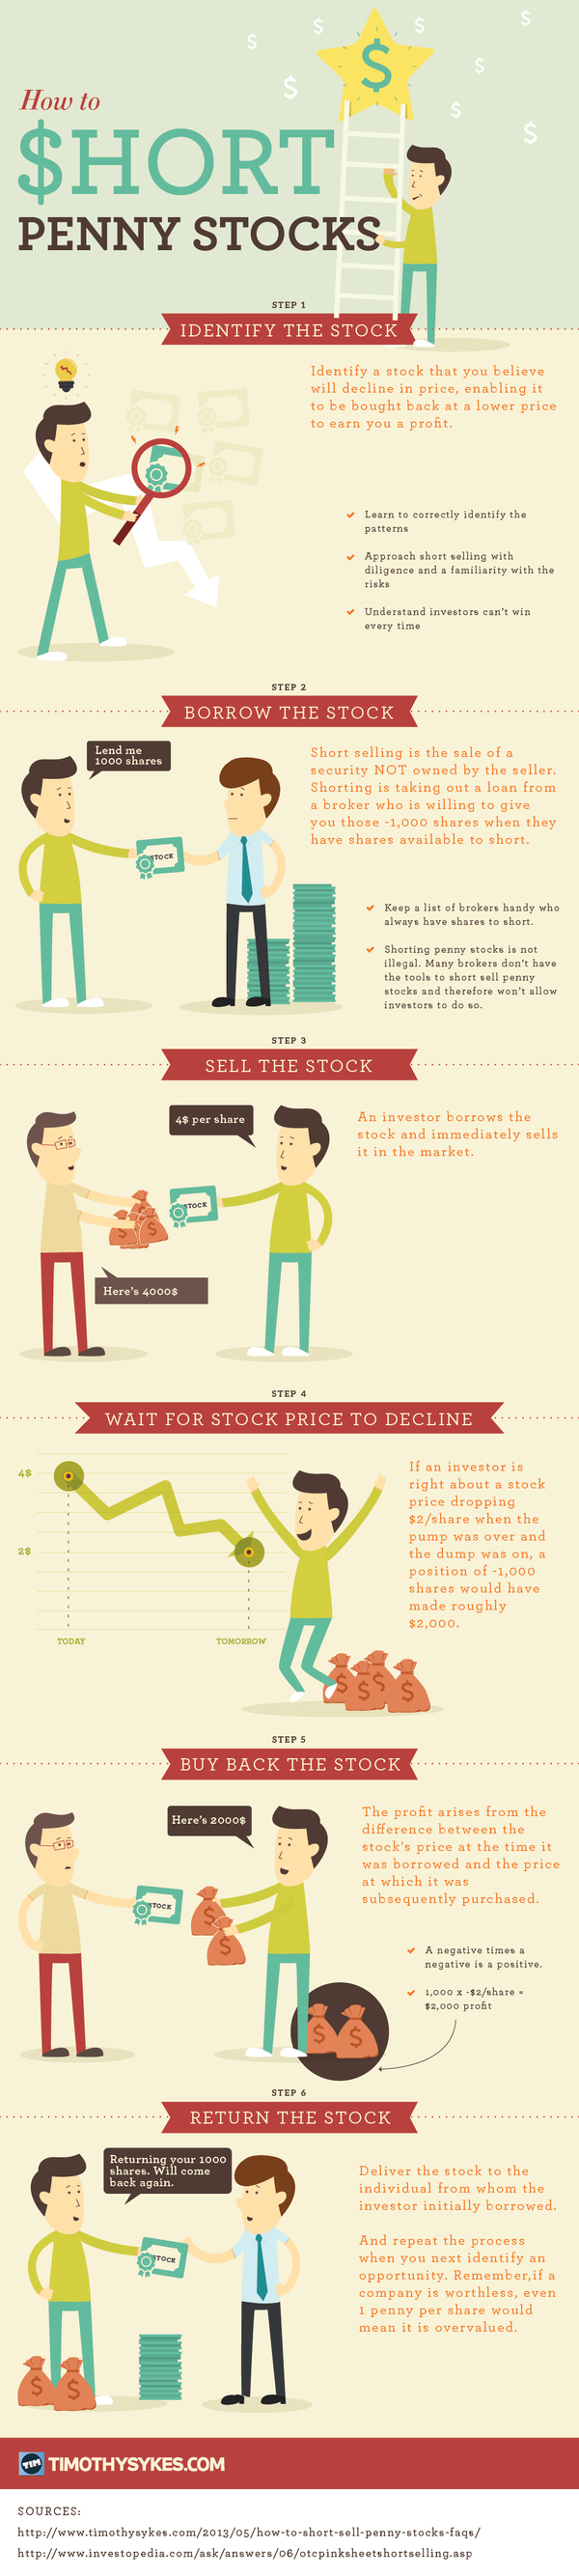 How to Short Penny Stocks Infographic